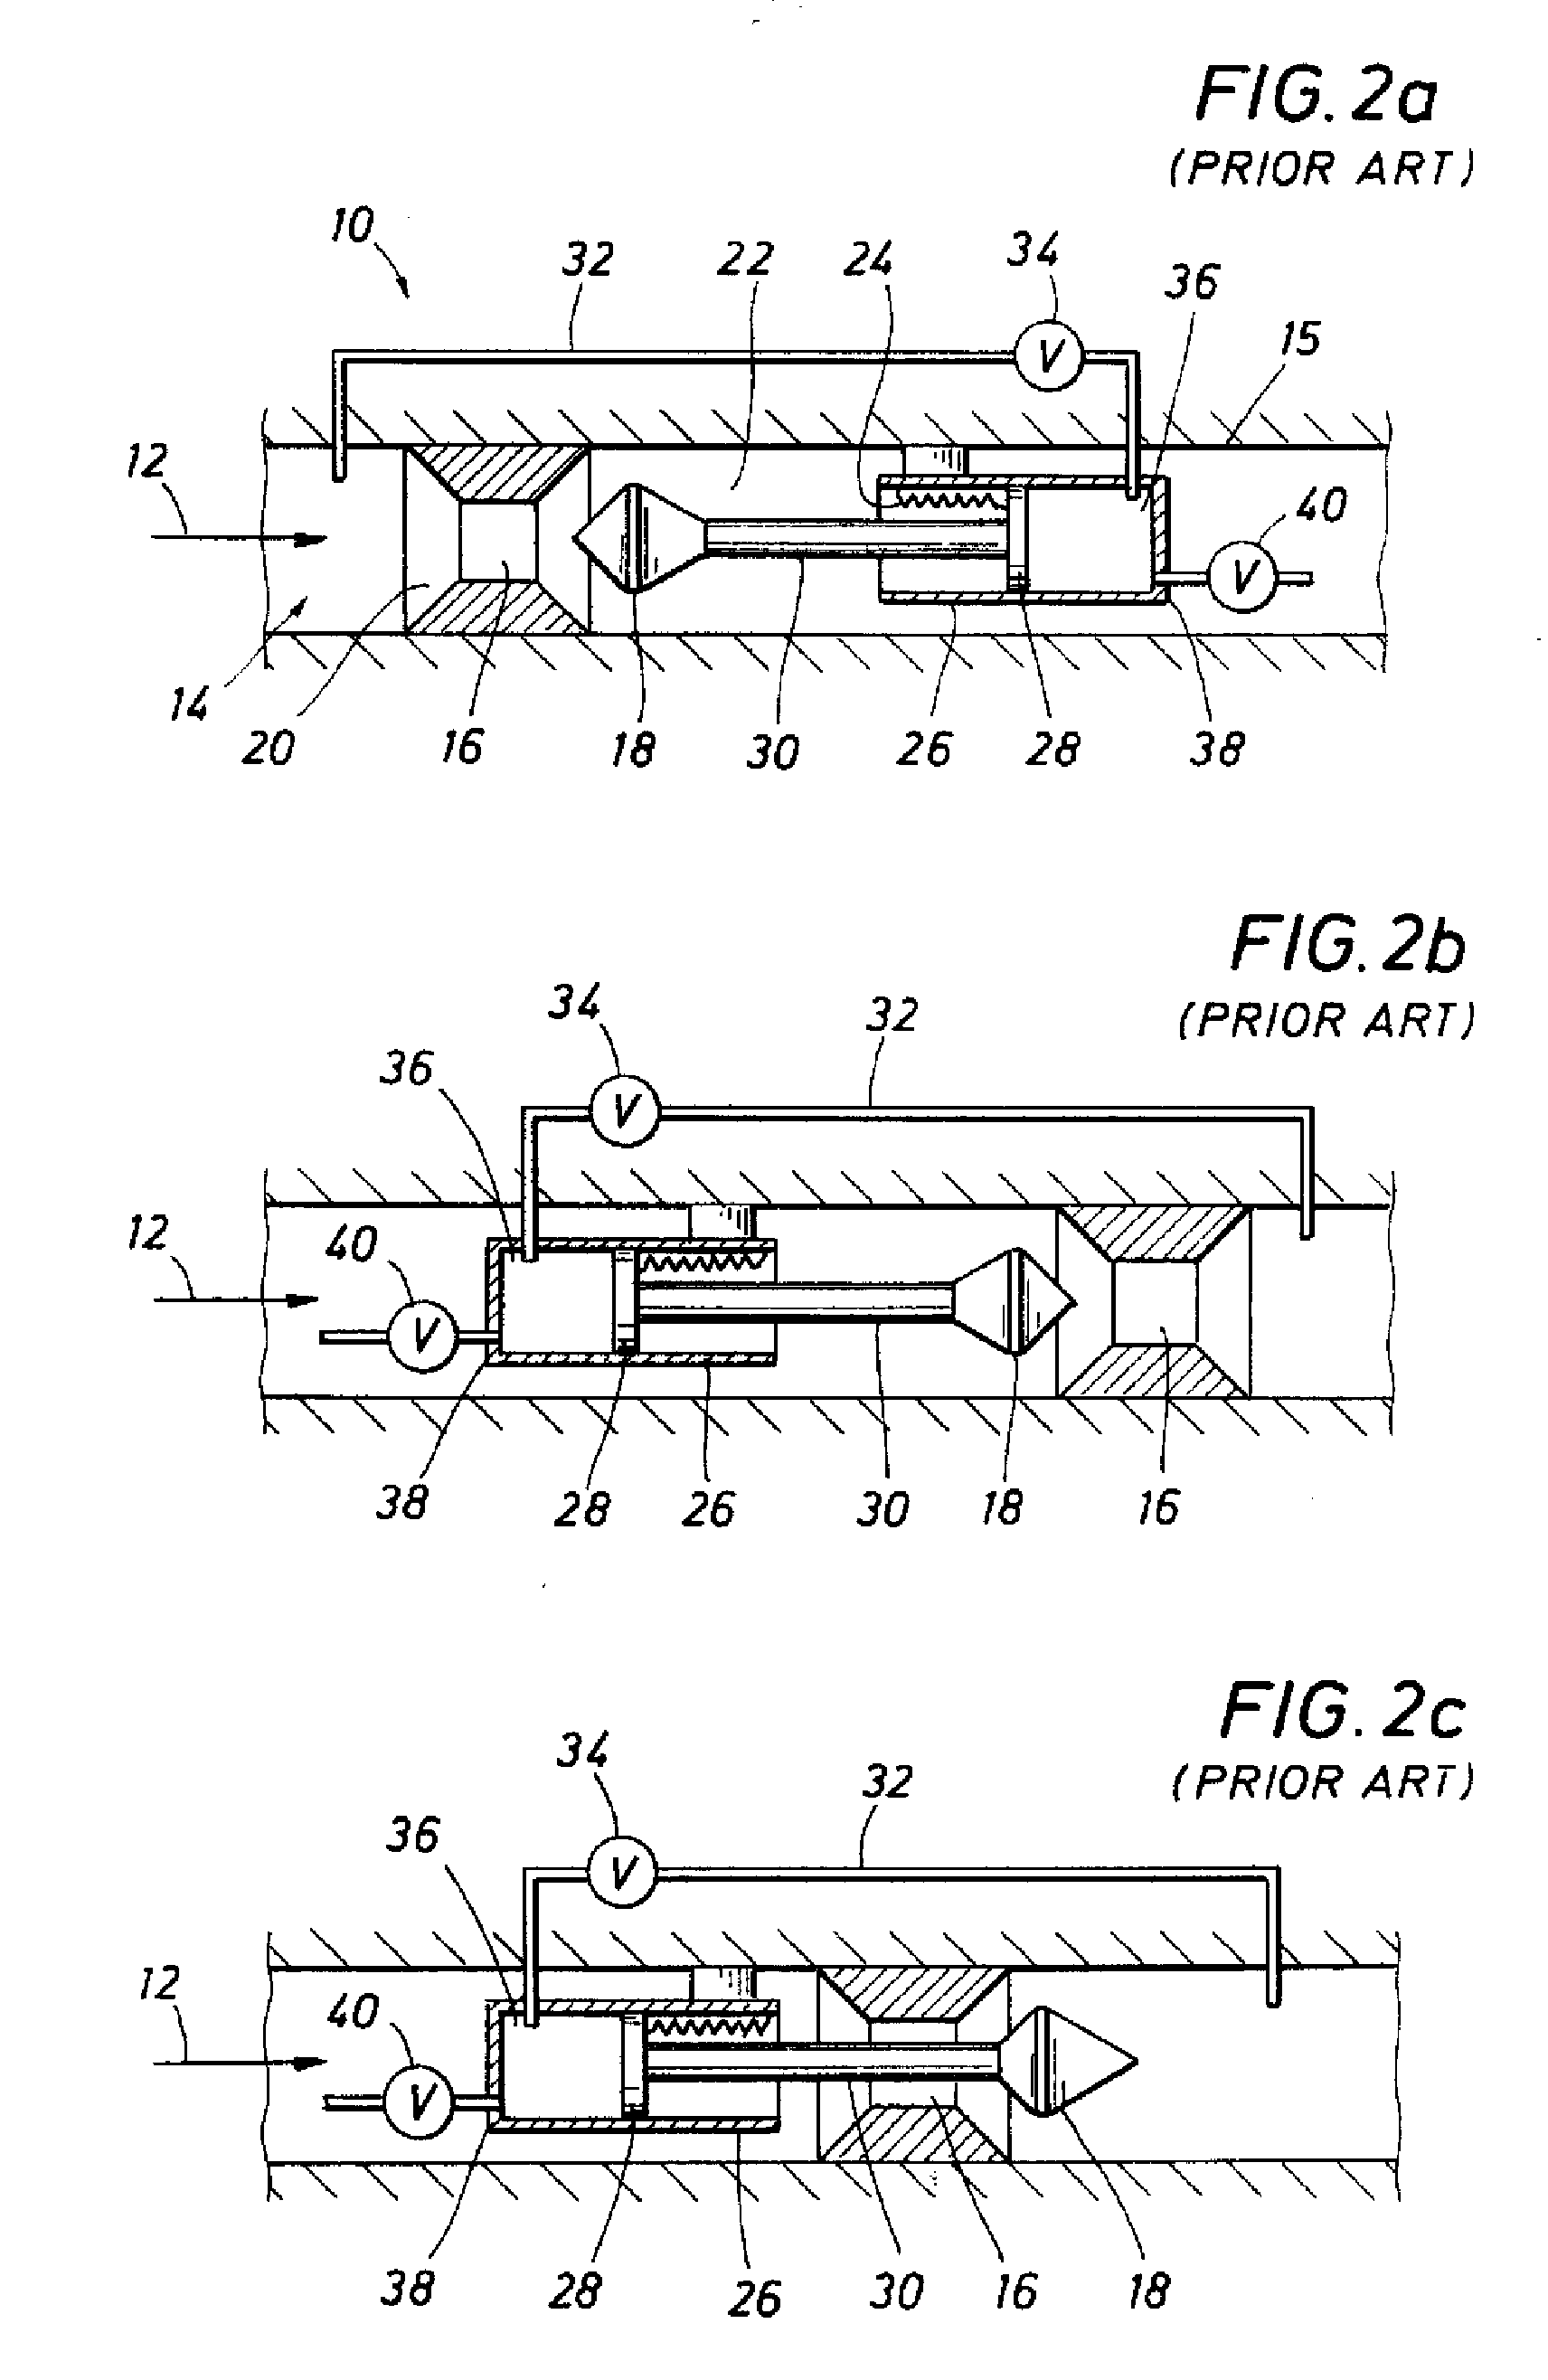 Hydraulic Oscillator For Use in a Transmitter Valve